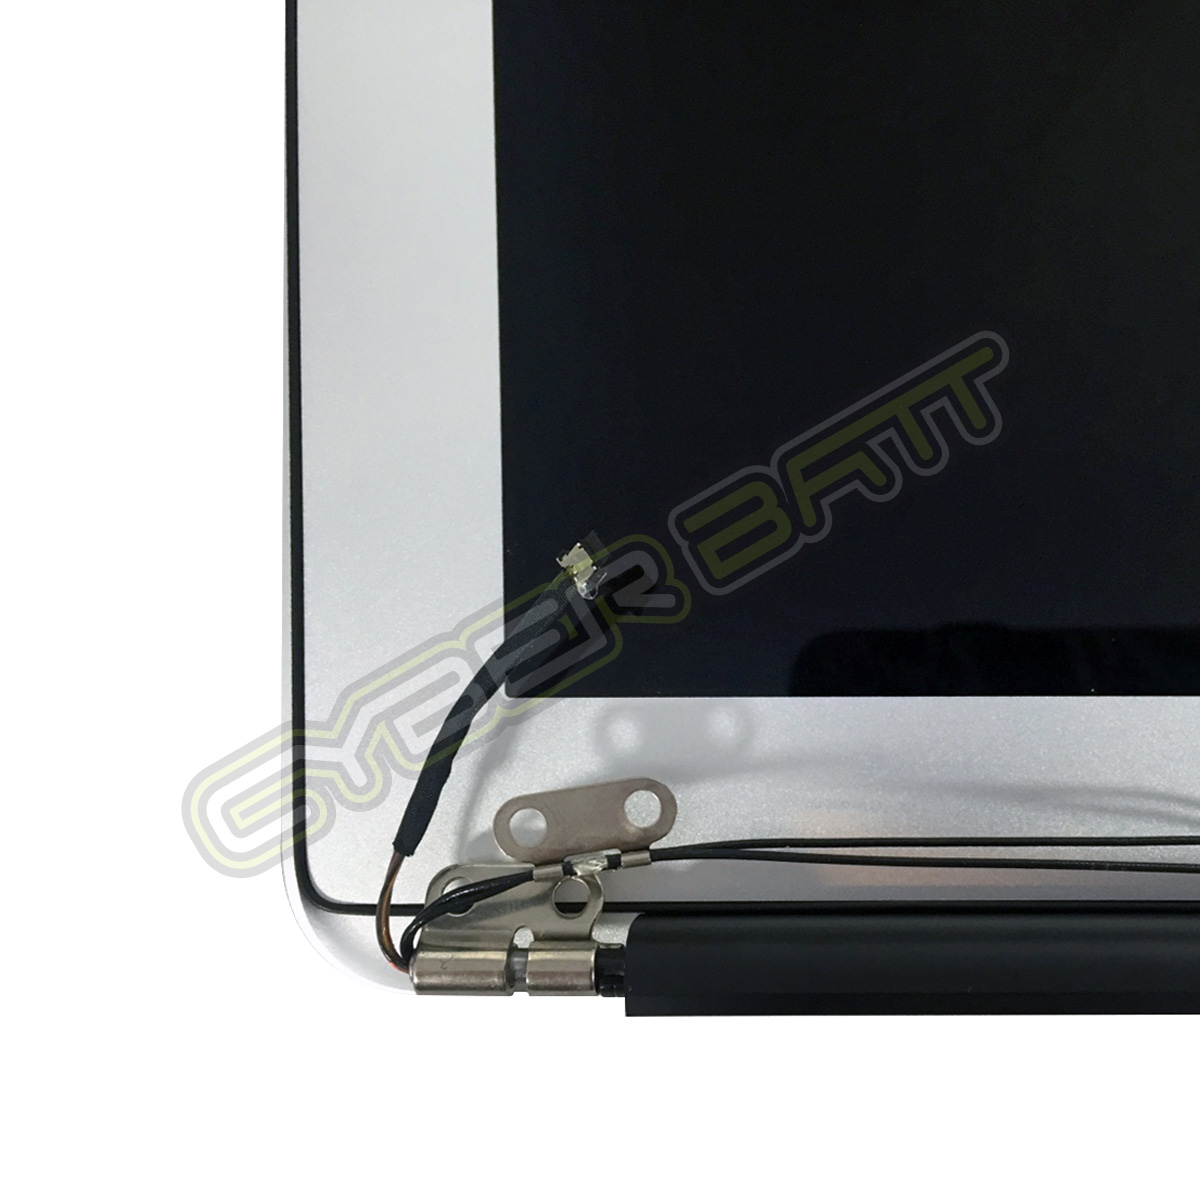 LCD Assembly MacBook Air 11 A1370 Mid 2011